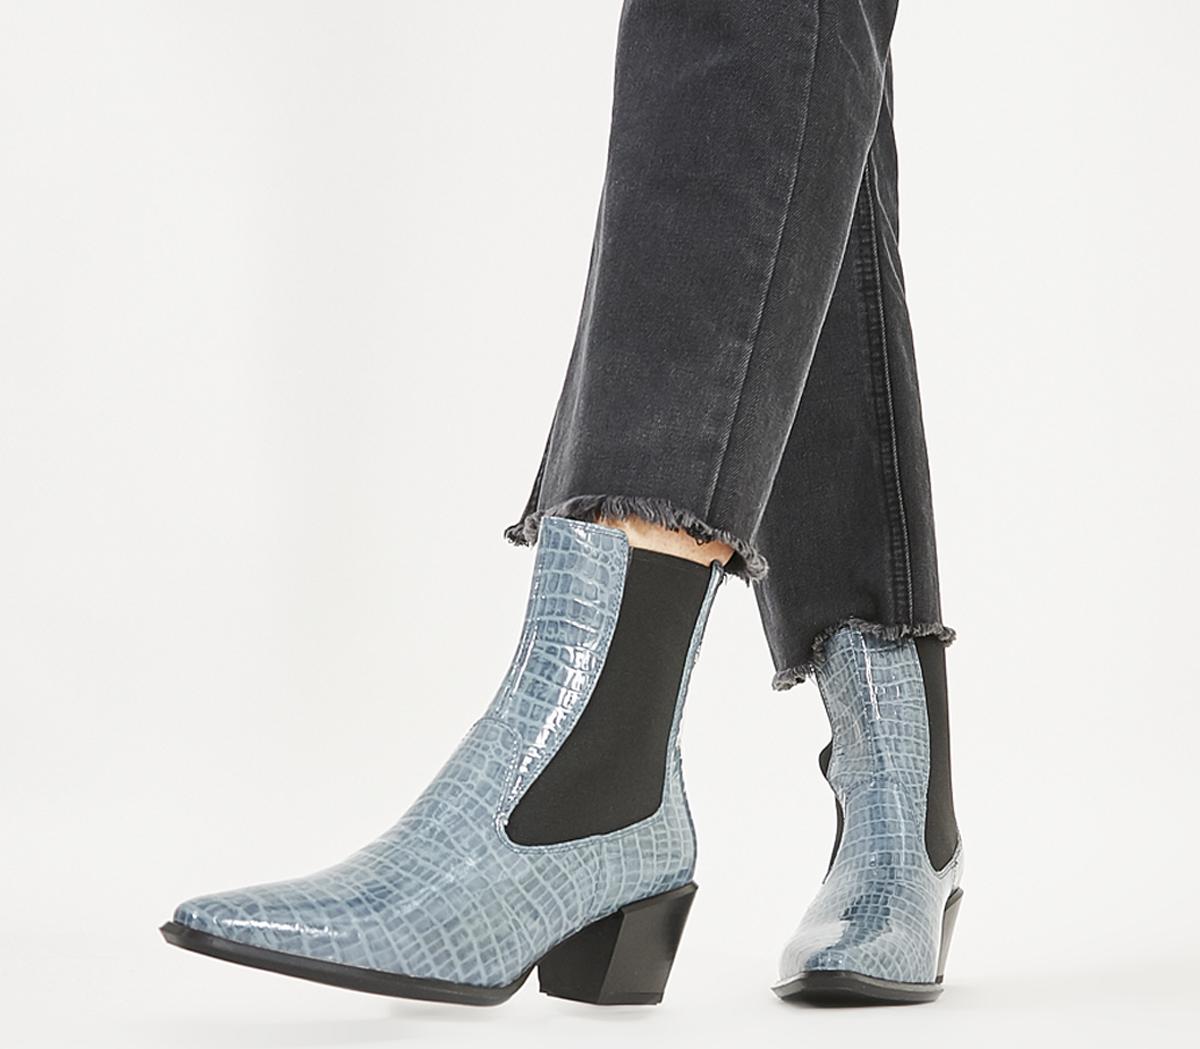 Vagabond Shoemakers Betsy Heel Chelsea Boots Dusty Blue - Women's Ankle ...